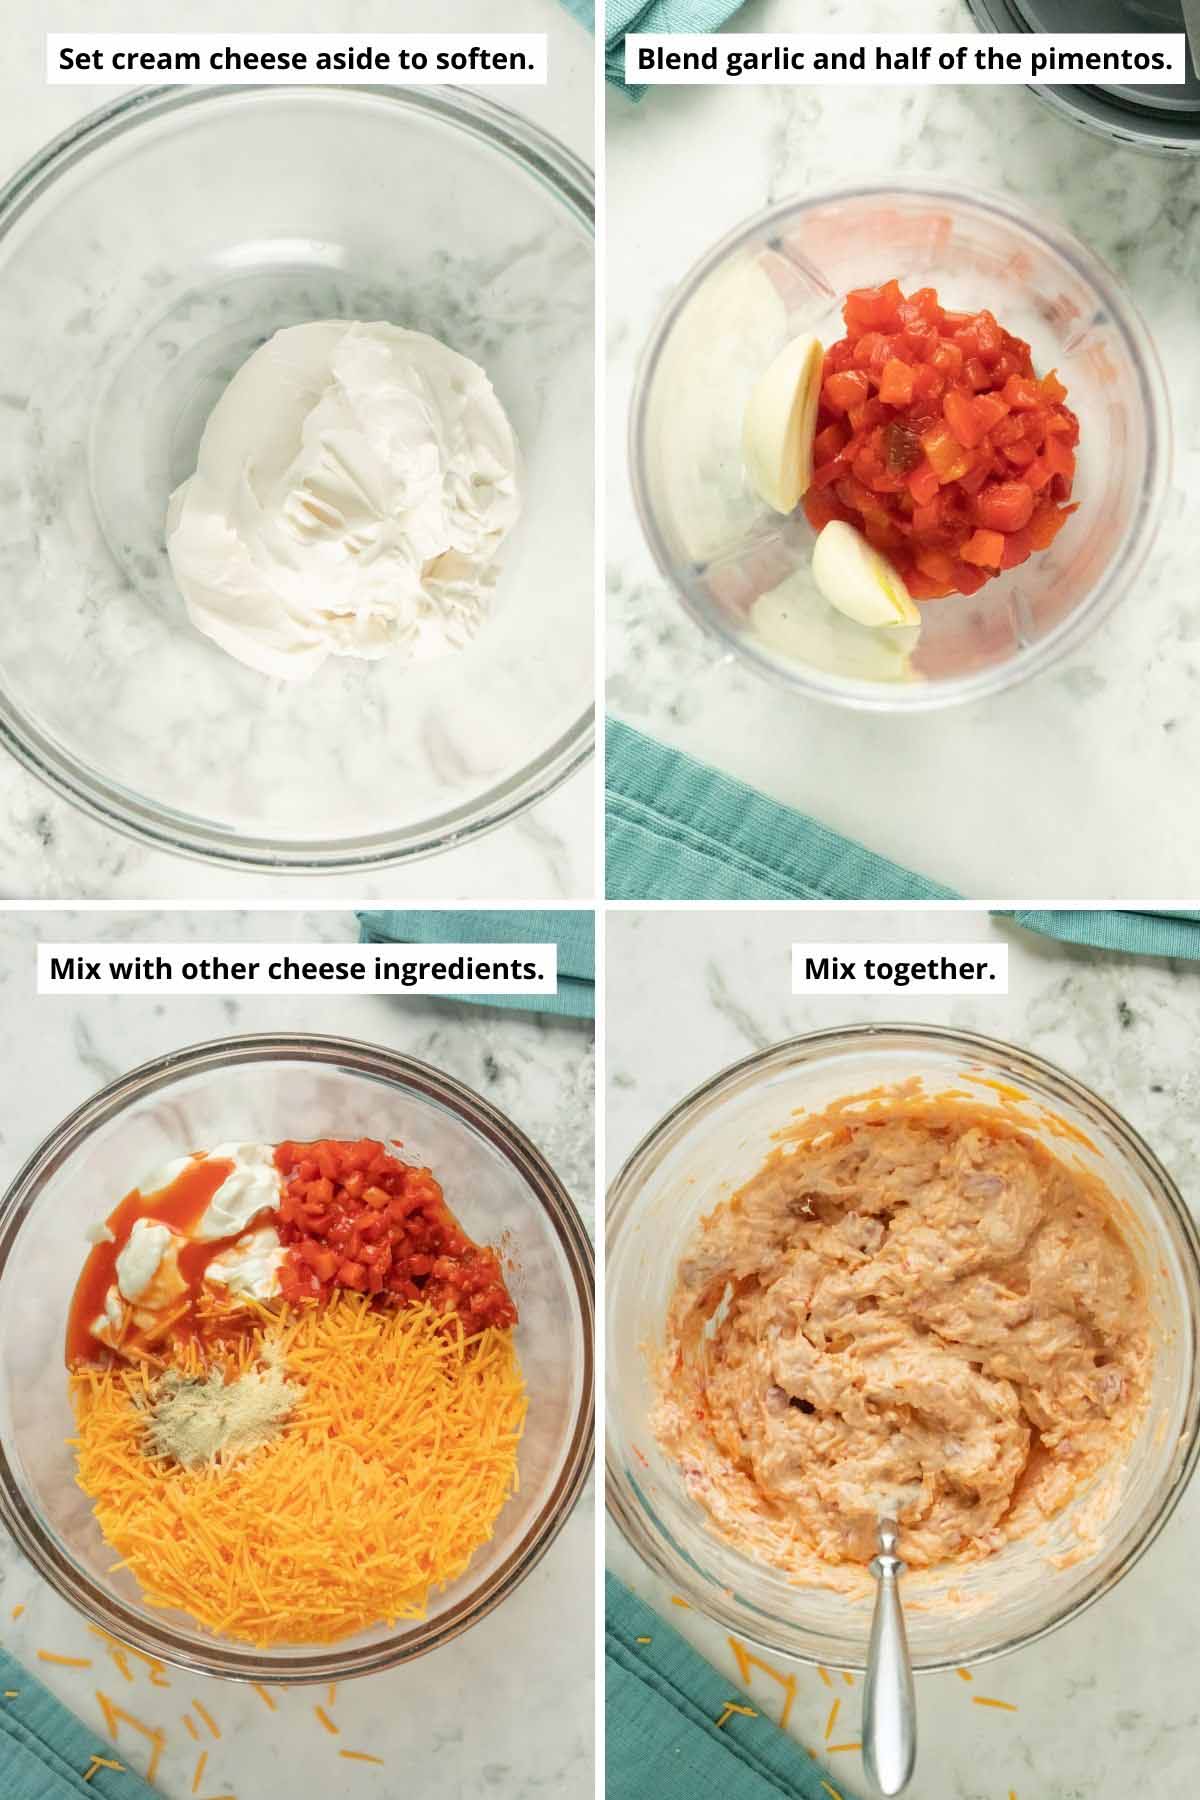 image collage showing a mixing bowl of vegan cream cheese, the garlic and pimentos in the blender, the rest of the pimento cheese ingredients in a bowl before and after mixing